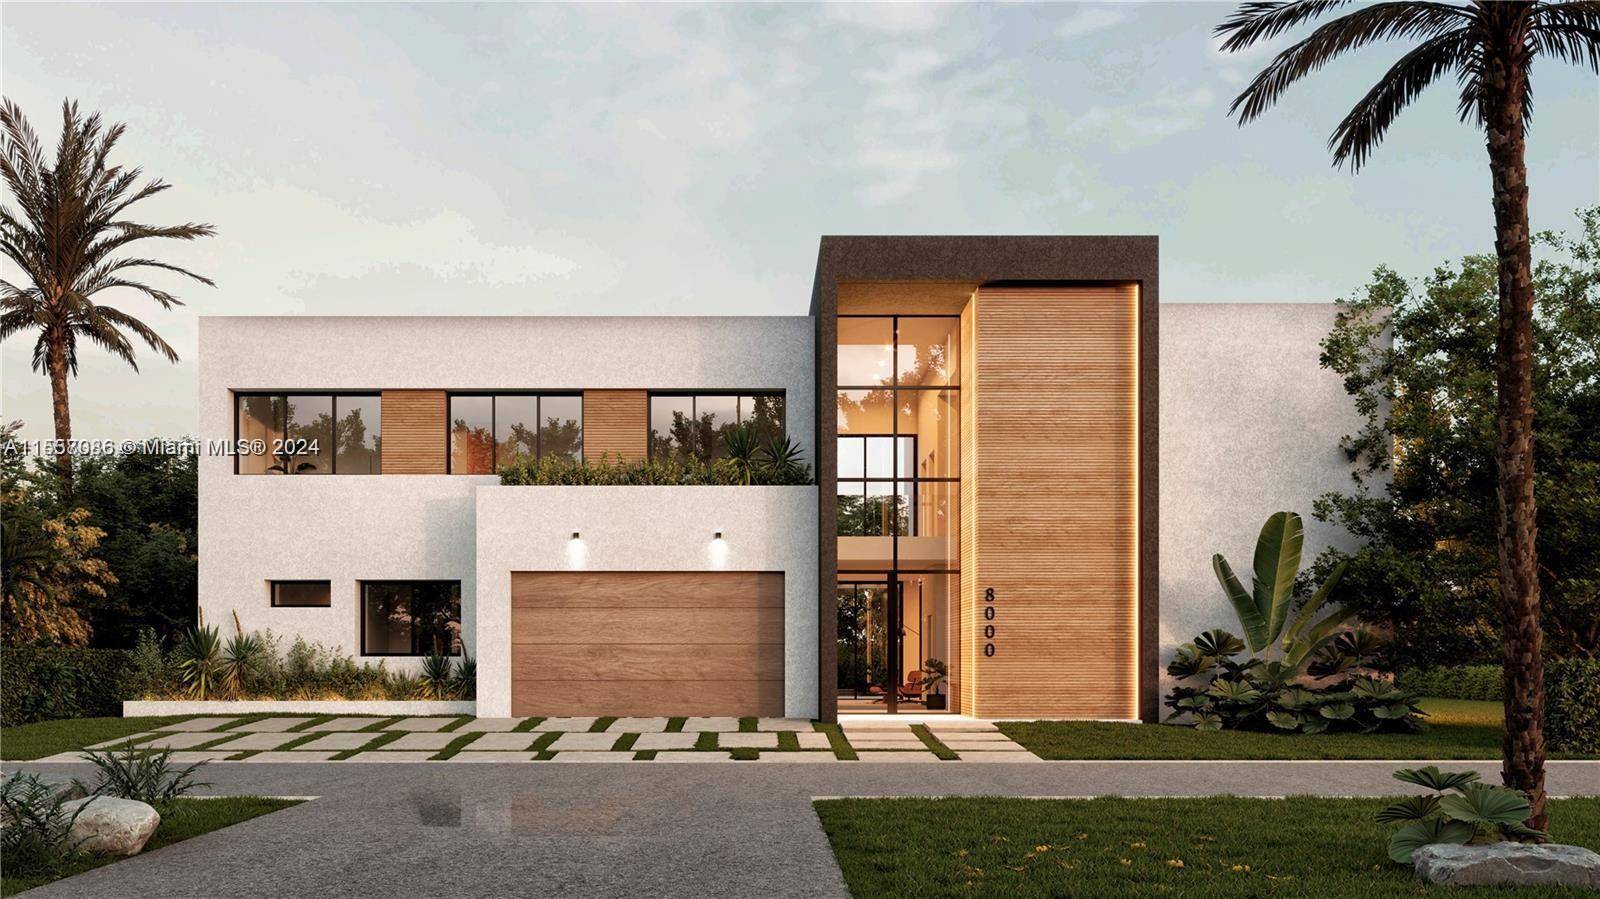 HOUSE READY TO MOVE IN ! Contemporary masterpiece in the heart of South Miami.